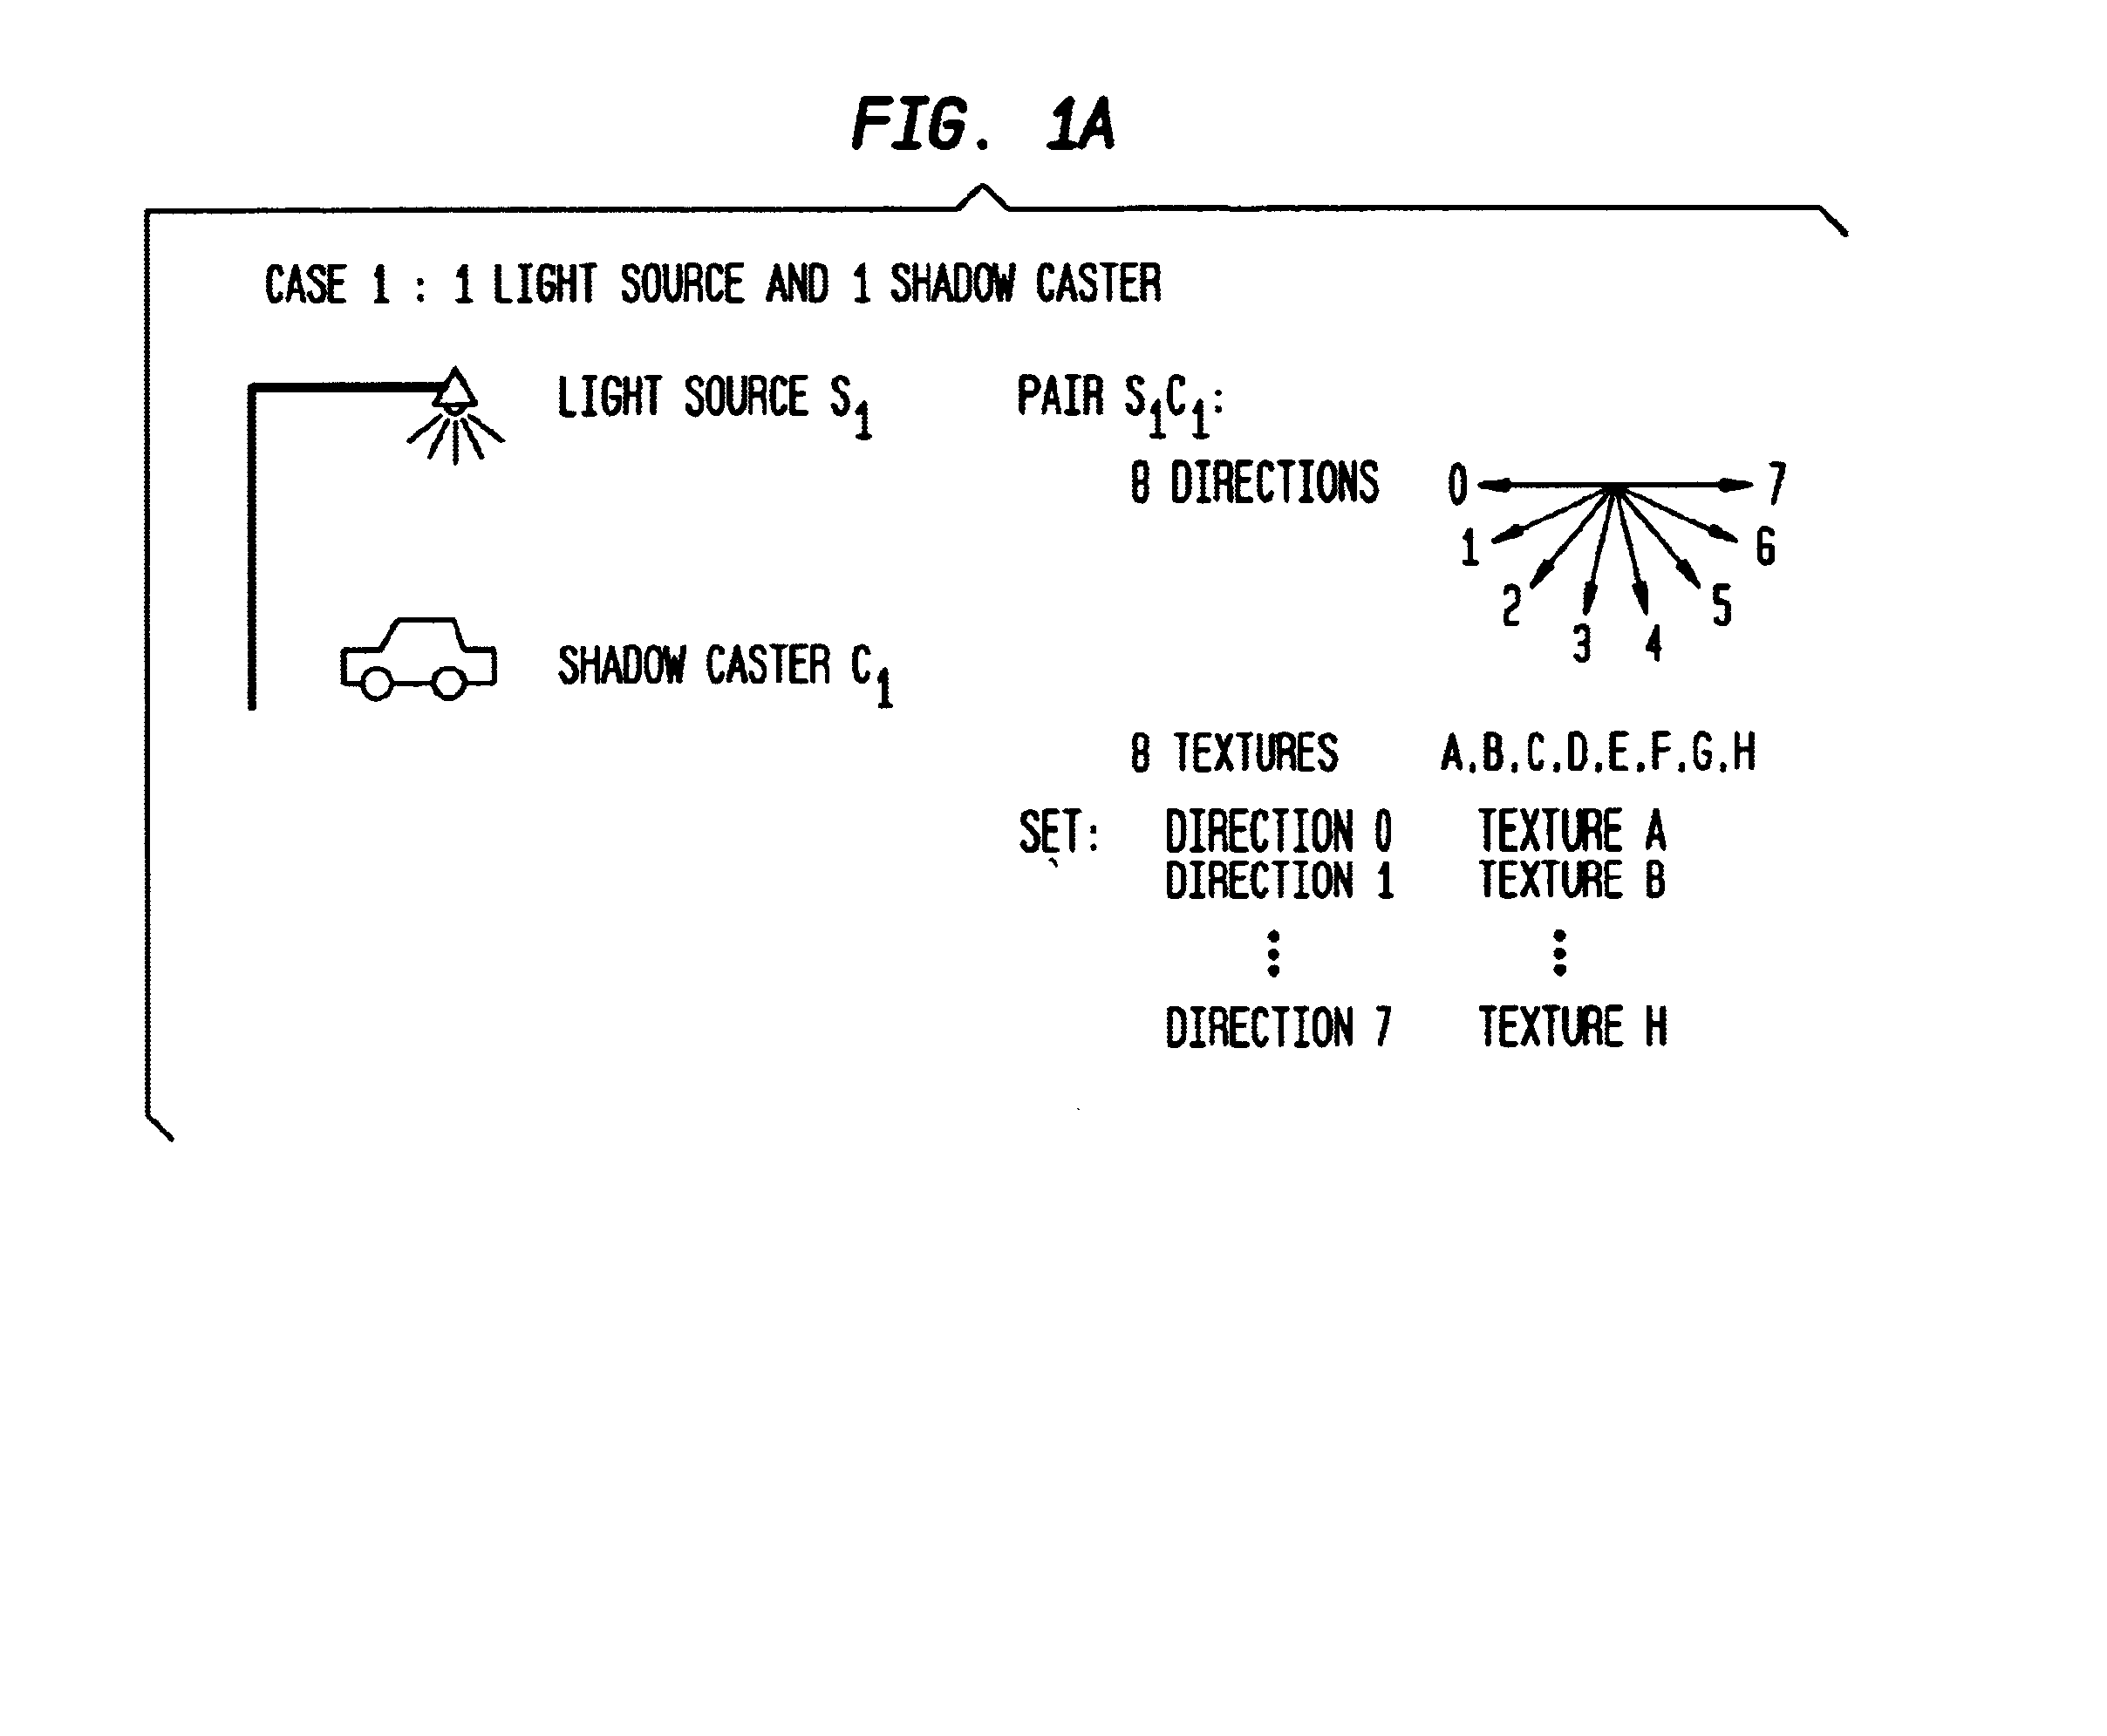 System and method for implementing shadows using pre-computed textures